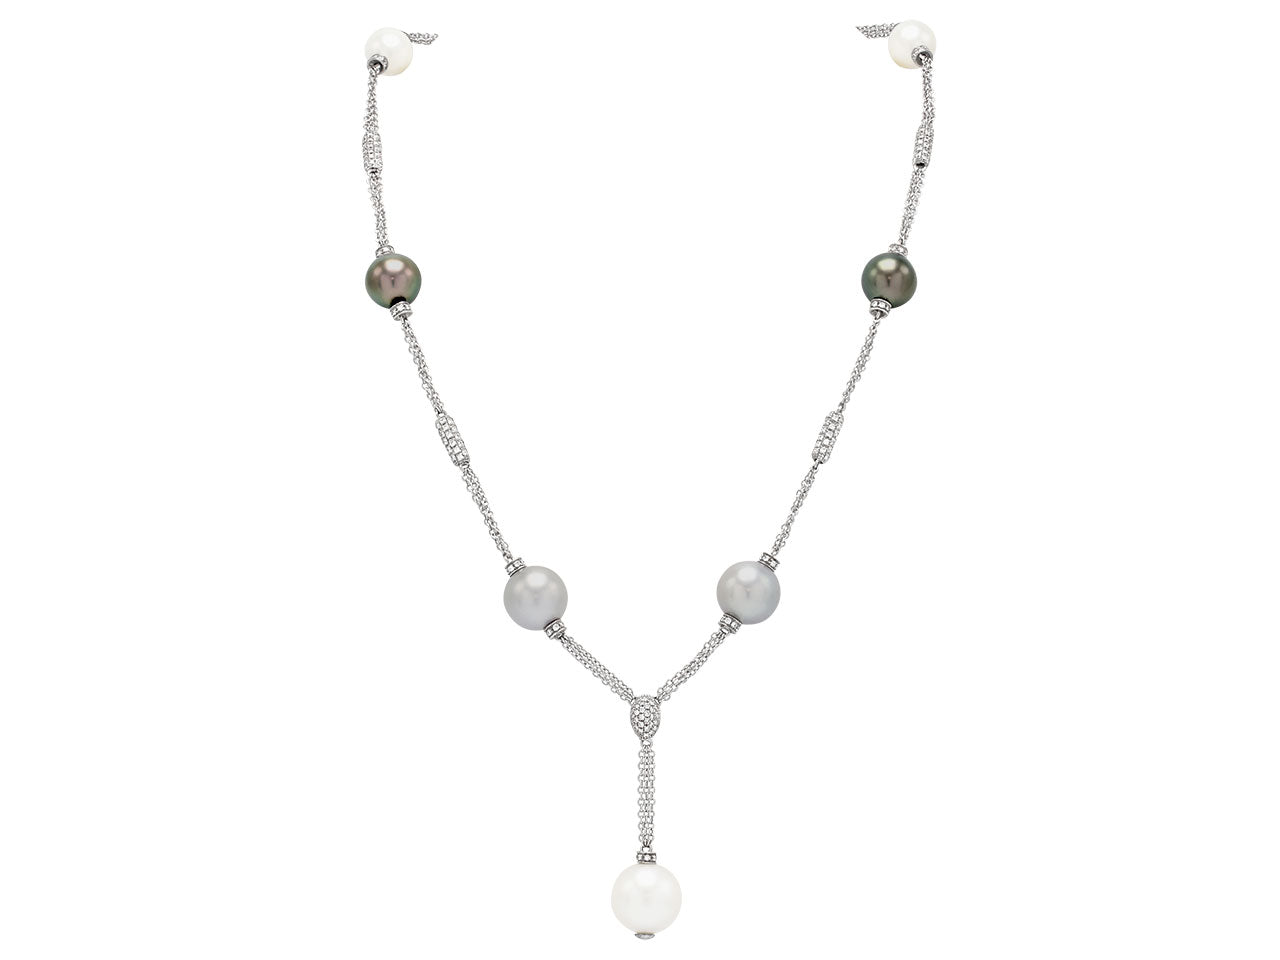 Diamond and Pearl Necklace in 18K White Gold